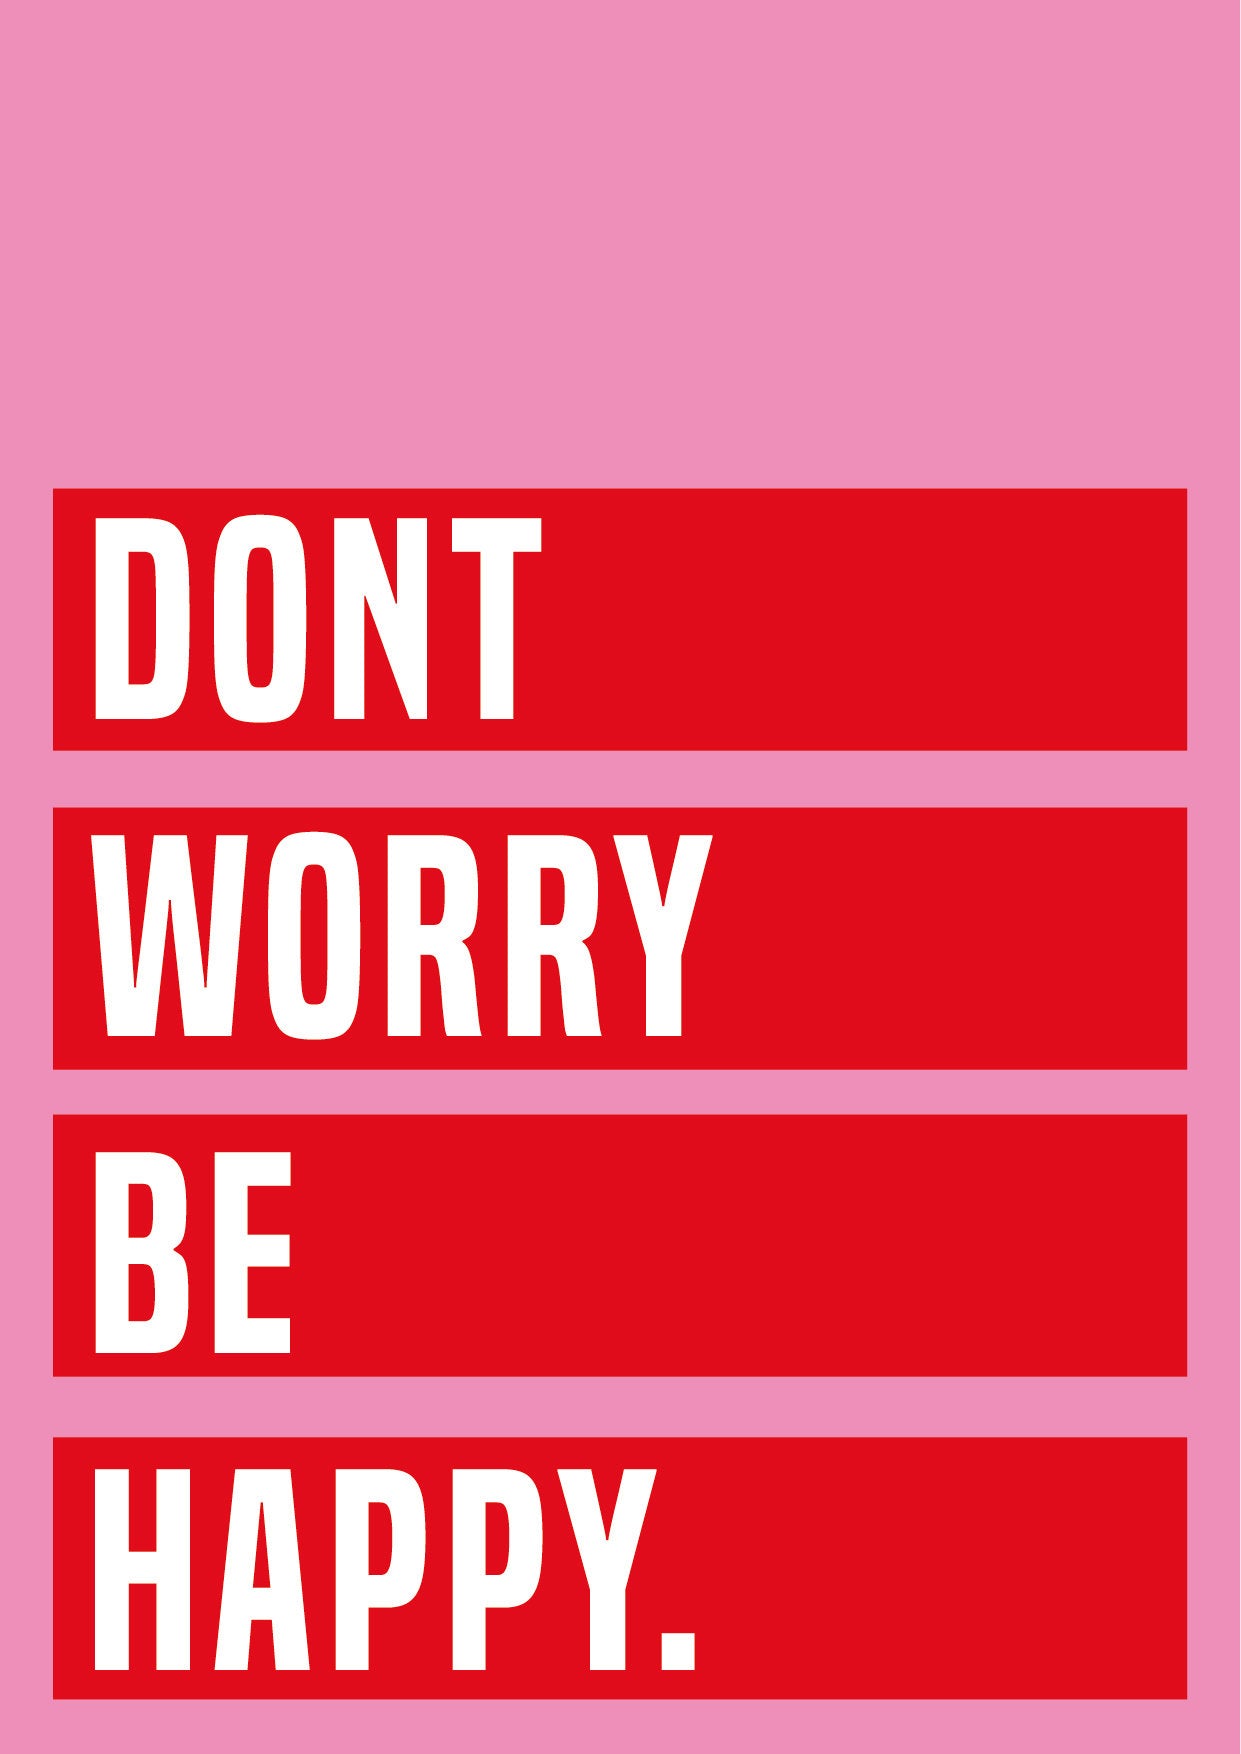 Don't worry, be happy Typography Print